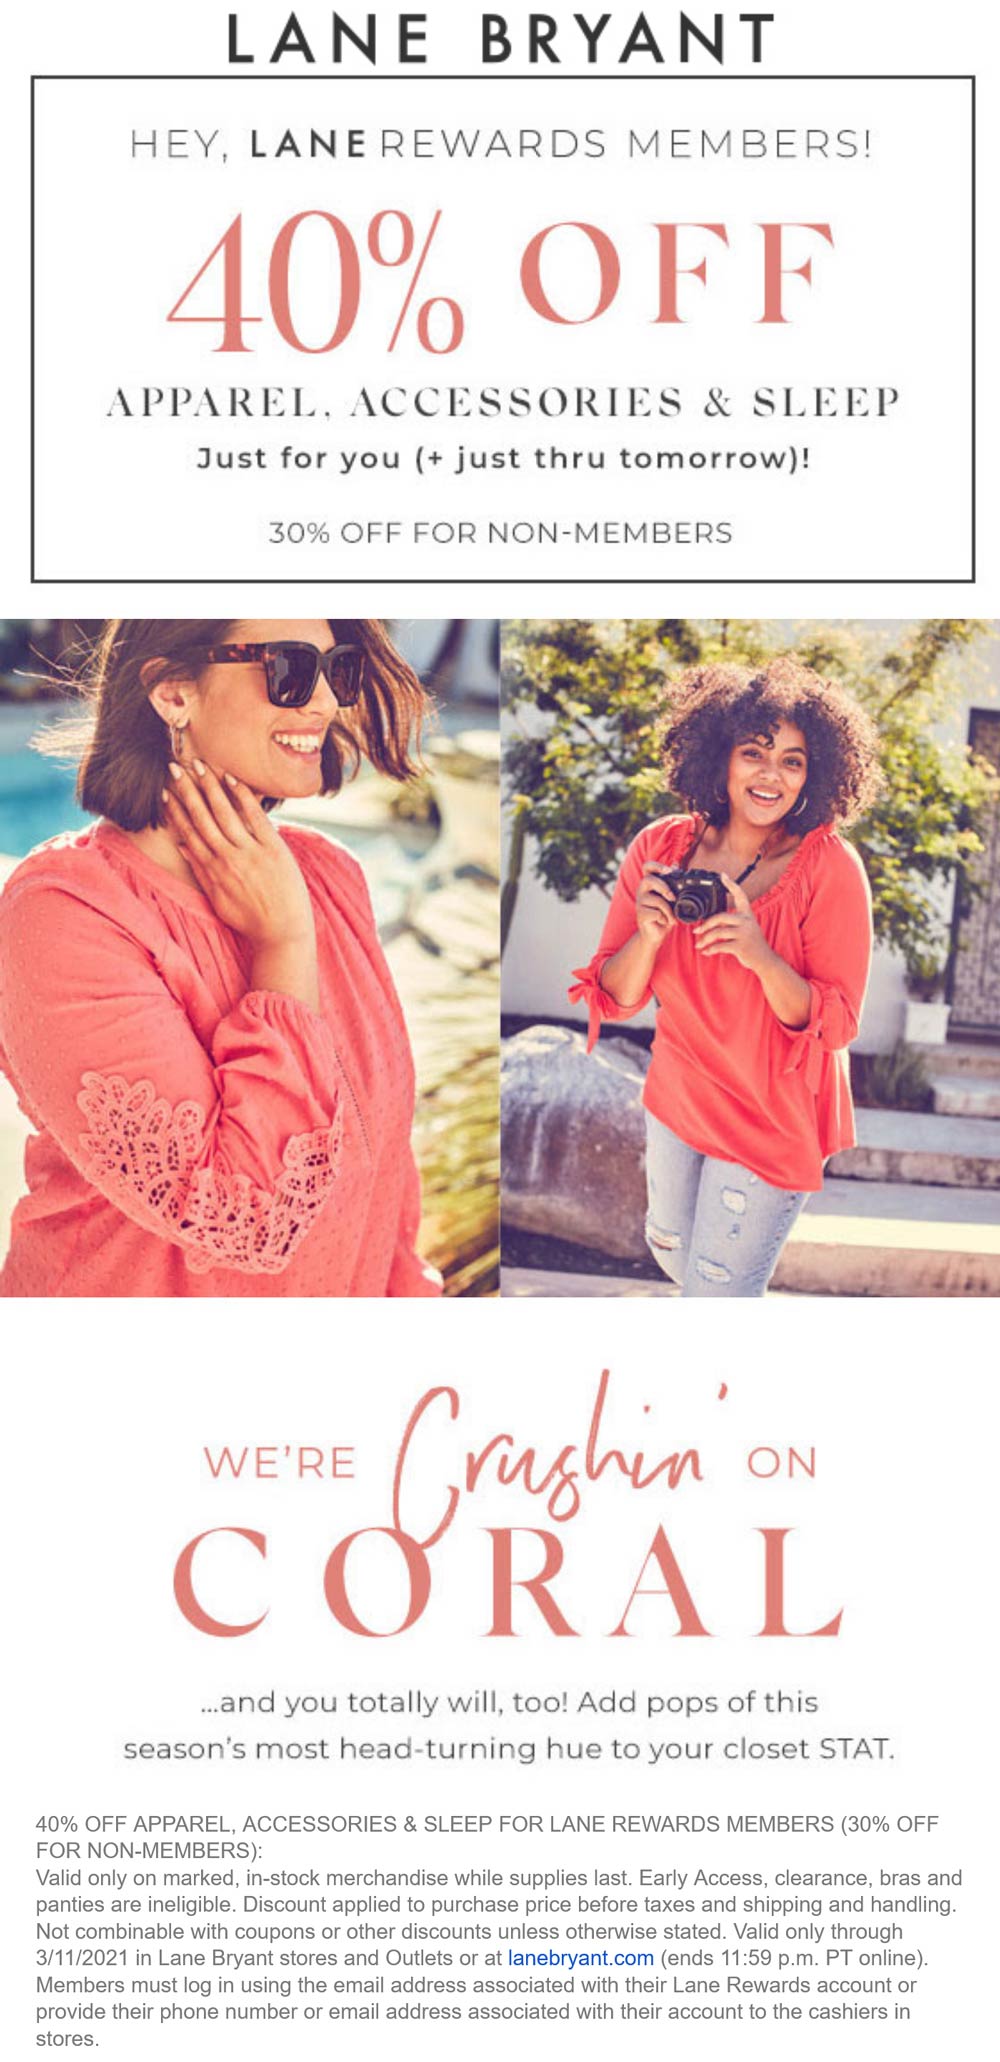 3040 off at Lane Bryant & outlets, ditto online lanebryant The